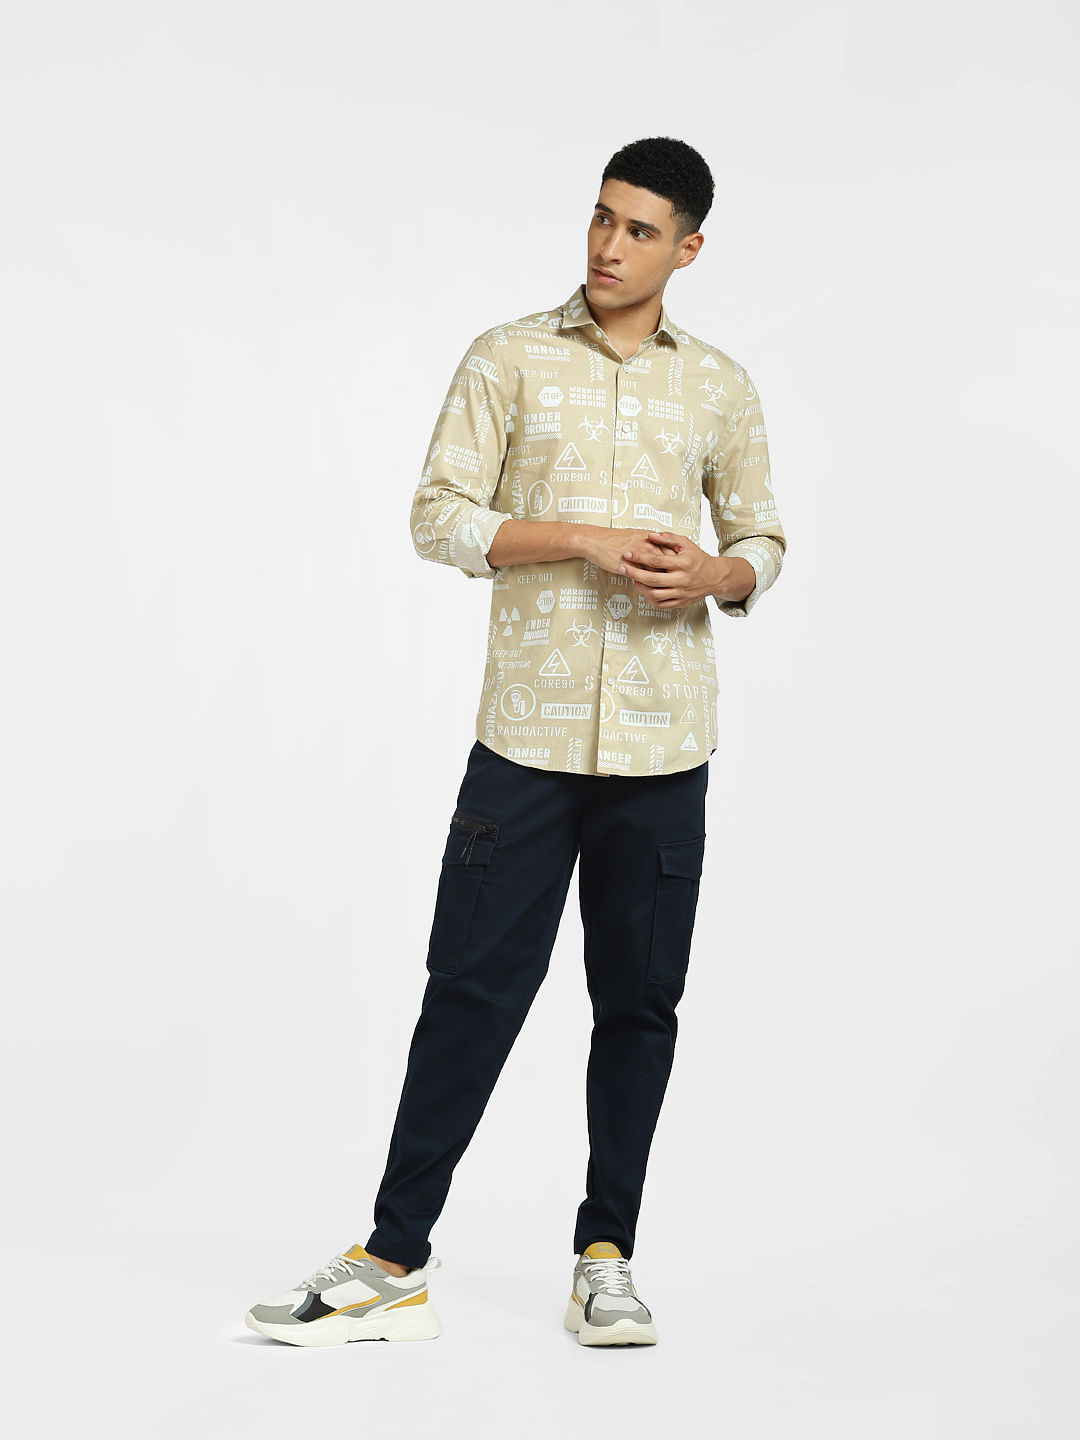 a man wearing a green shirt and khaki pants and white shoes Stock Photo by  Icons8